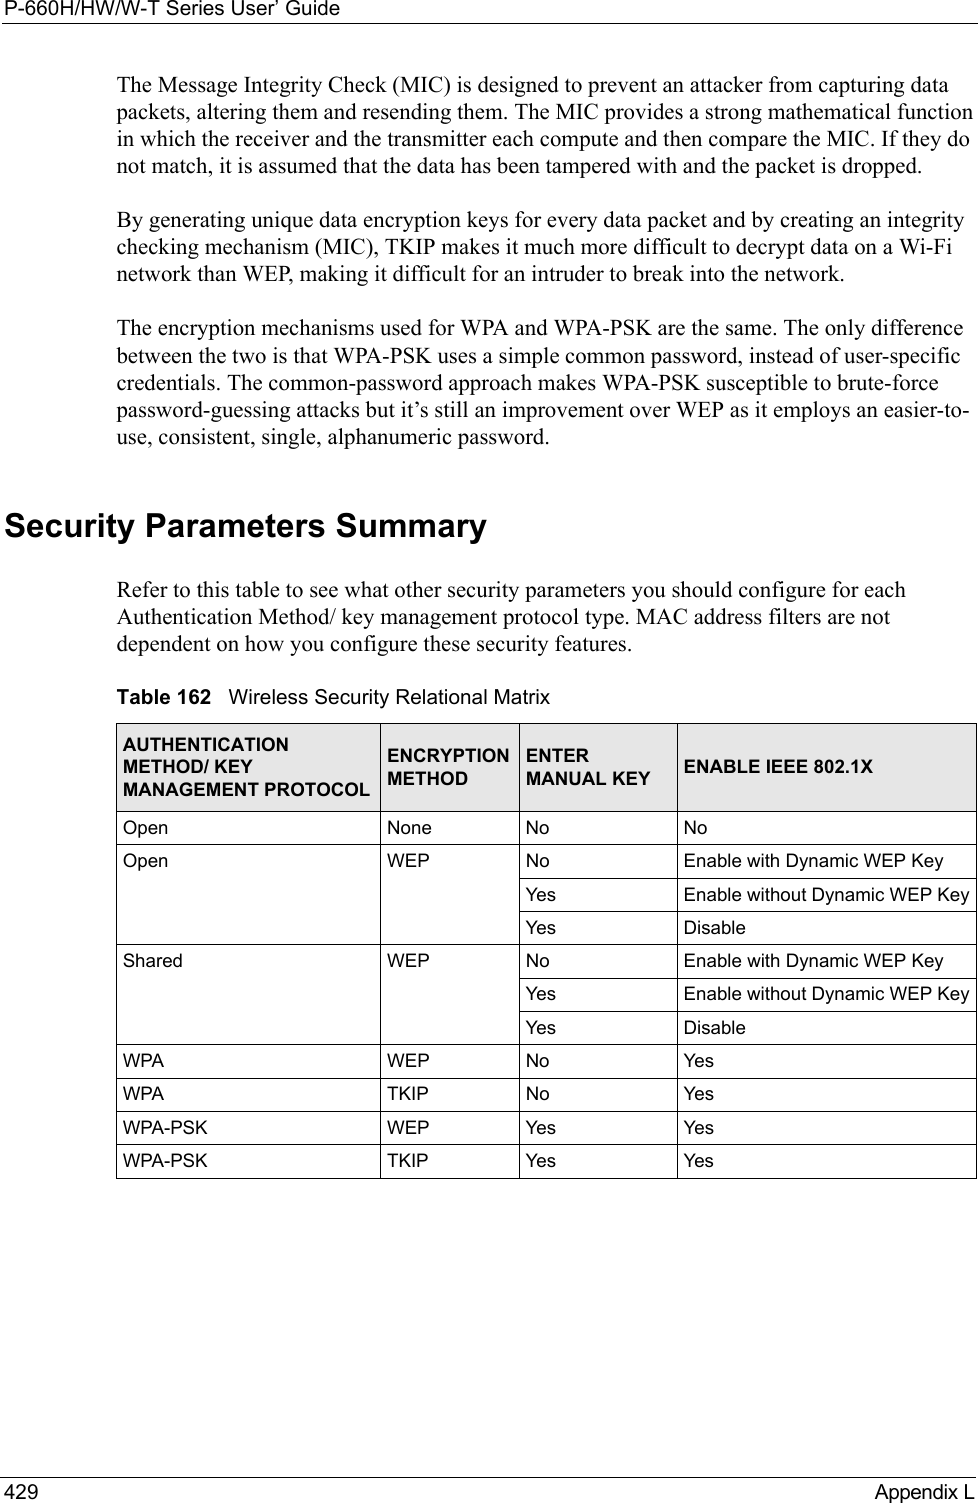 P-660H/HW/W-T Series User’ Guide429 Appendix LThe Message Integrity Check (MIC) is designed to prevent an attacker from capturing data packets, altering them and resending them. The MIC provides a strong mathematical function in which the receiver and the transmitter each compute and then compare the MIC. If they do not match, it is assumed that the data has been tampered with and the packet is dropped. By generating unique data encryption keys for every data packet and by creating an integrity checking mechanism (MIC), TKIP makes it much more difficult to decrypt data on a Wi-Fi network than WEP, making it difficult for an intruder to break into the network. The encryption mechanisms used for WPA and WPA-PSK are the same. The only difference between the two is that WPA-PSK uses a simple common password, instead of user-specific credentials. The common-password approach makes WPA-PSK susceptible to brute-force password-guessing attacks but it’s still an improvement over WEP as it employs an easier-to-use, consistent, single, alphanumeric password.Security Parameters SummaryRefer to this table to see what other security parameters you should configure for each Authentication Method/ key management protocol type. MAC address filters are not dependent on how you configure these security features.Table 162   Wireless Security Relational MatrixAUTHENTICATION METHOD/ KEY MANAGEMENT PROTOCOLENCRYPTION METHODENTER MANUAL KEY ENABLE IEEE 802.1X Open None No NoOpen WEP No Enable with Dynamic WEP Key Yes Enable without Dynamic WEP KeyYes Disable Shared WEP  No Enable with Dynamic WEP KeyYes Enable without Dynamic WEP KeyYes Disable WPA WEP No YesWPA TKIP No YesWPA-PSK WEP Yes Yes WPA-PSK TKIP Yes Yes